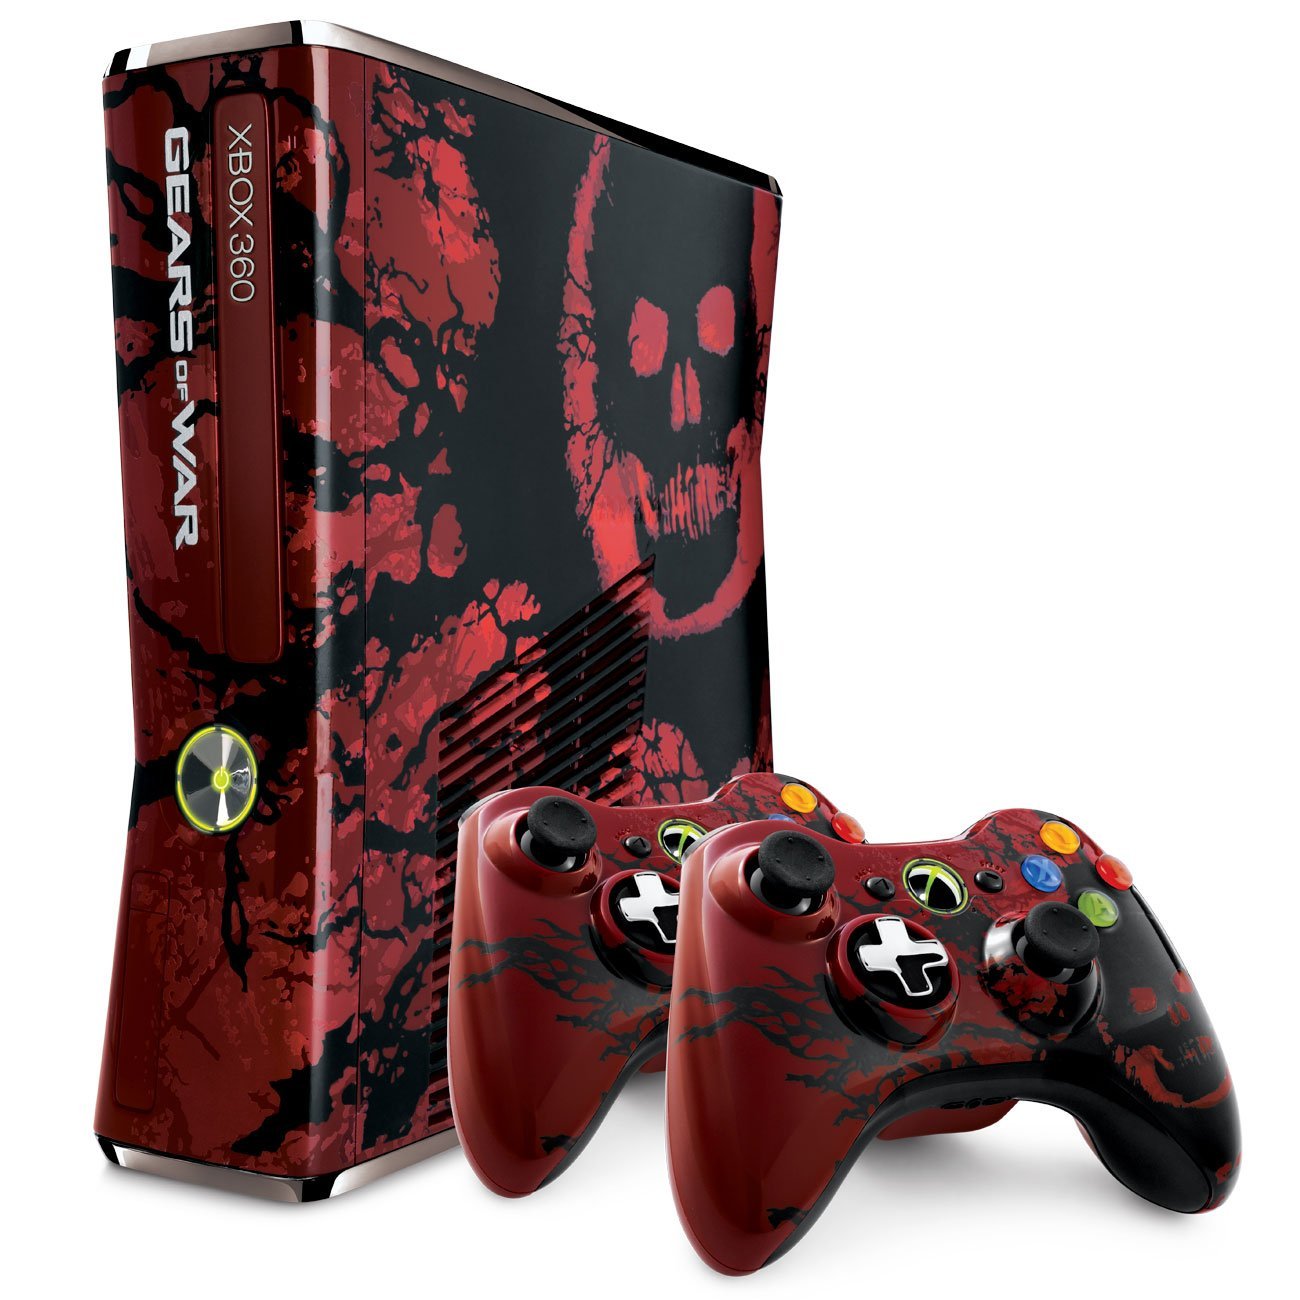 Xbox 360 320GB Gears of War 3 Limited Edition Console